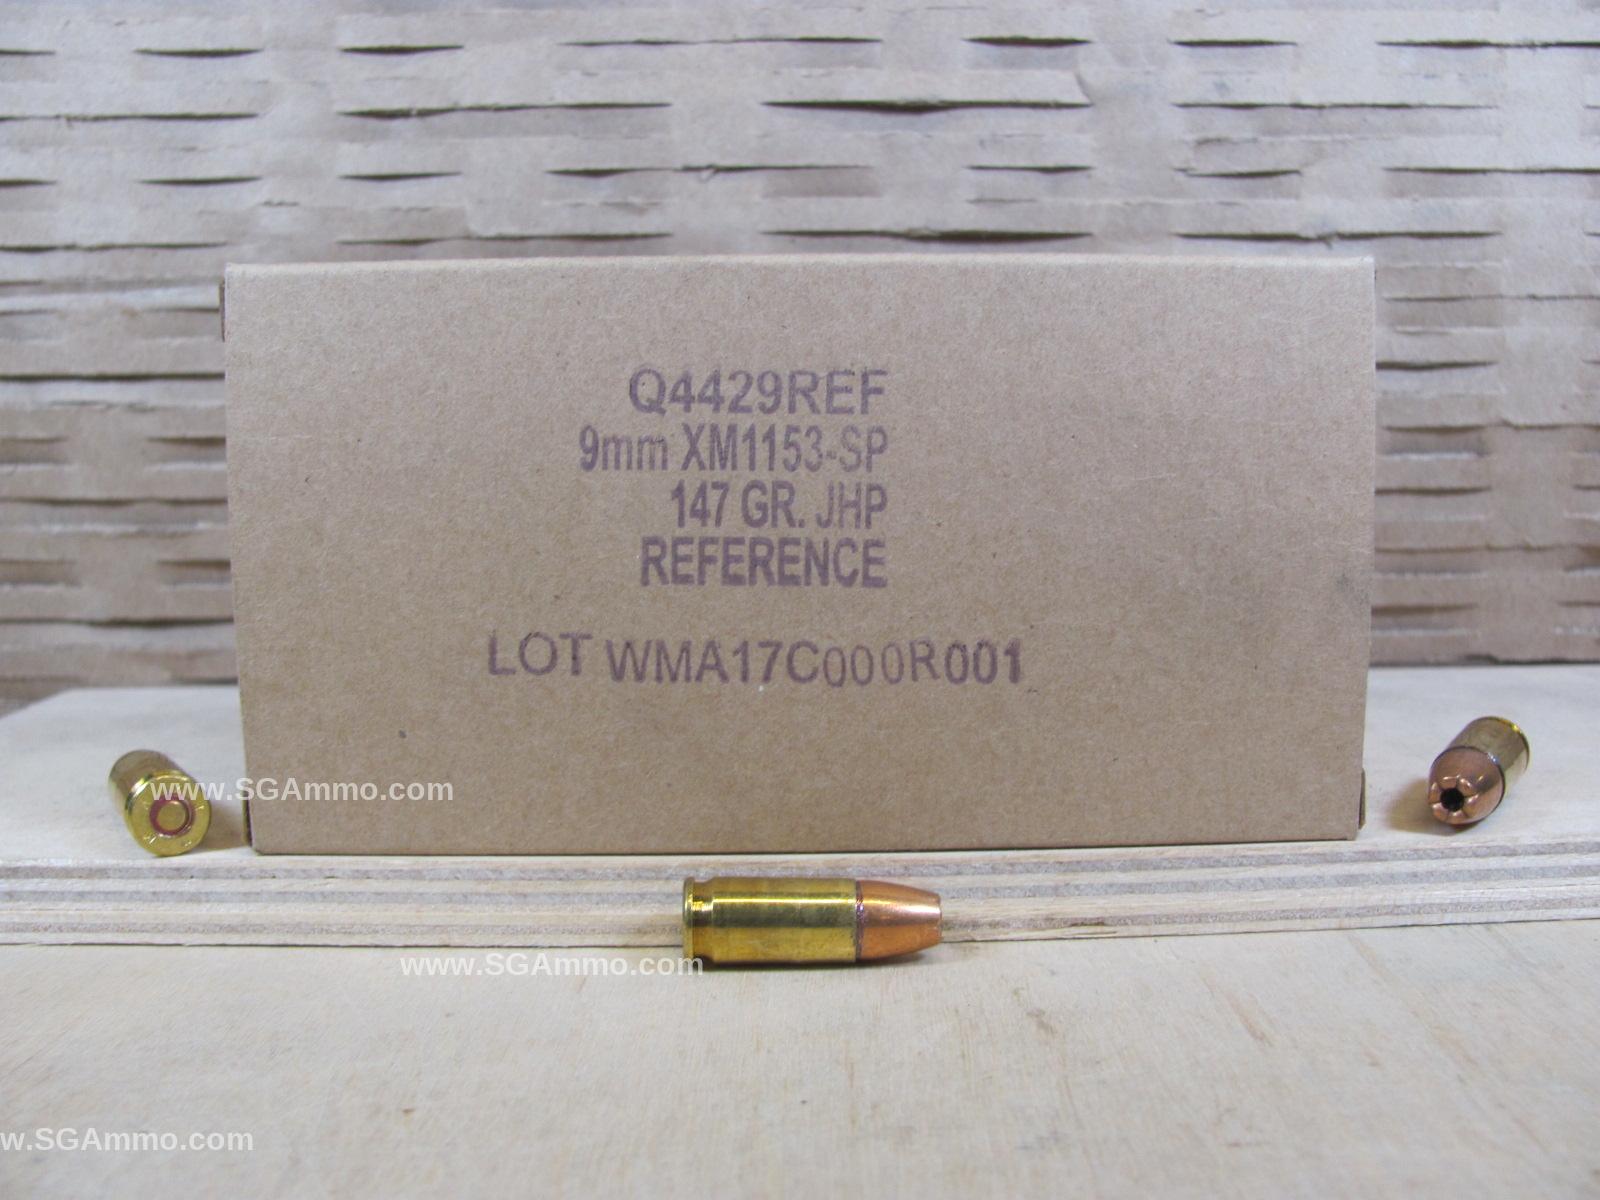 500 Round Case - 9mm 147 Grain JHP XM1153-SP Winchester Reference Ammo - Q4429REF